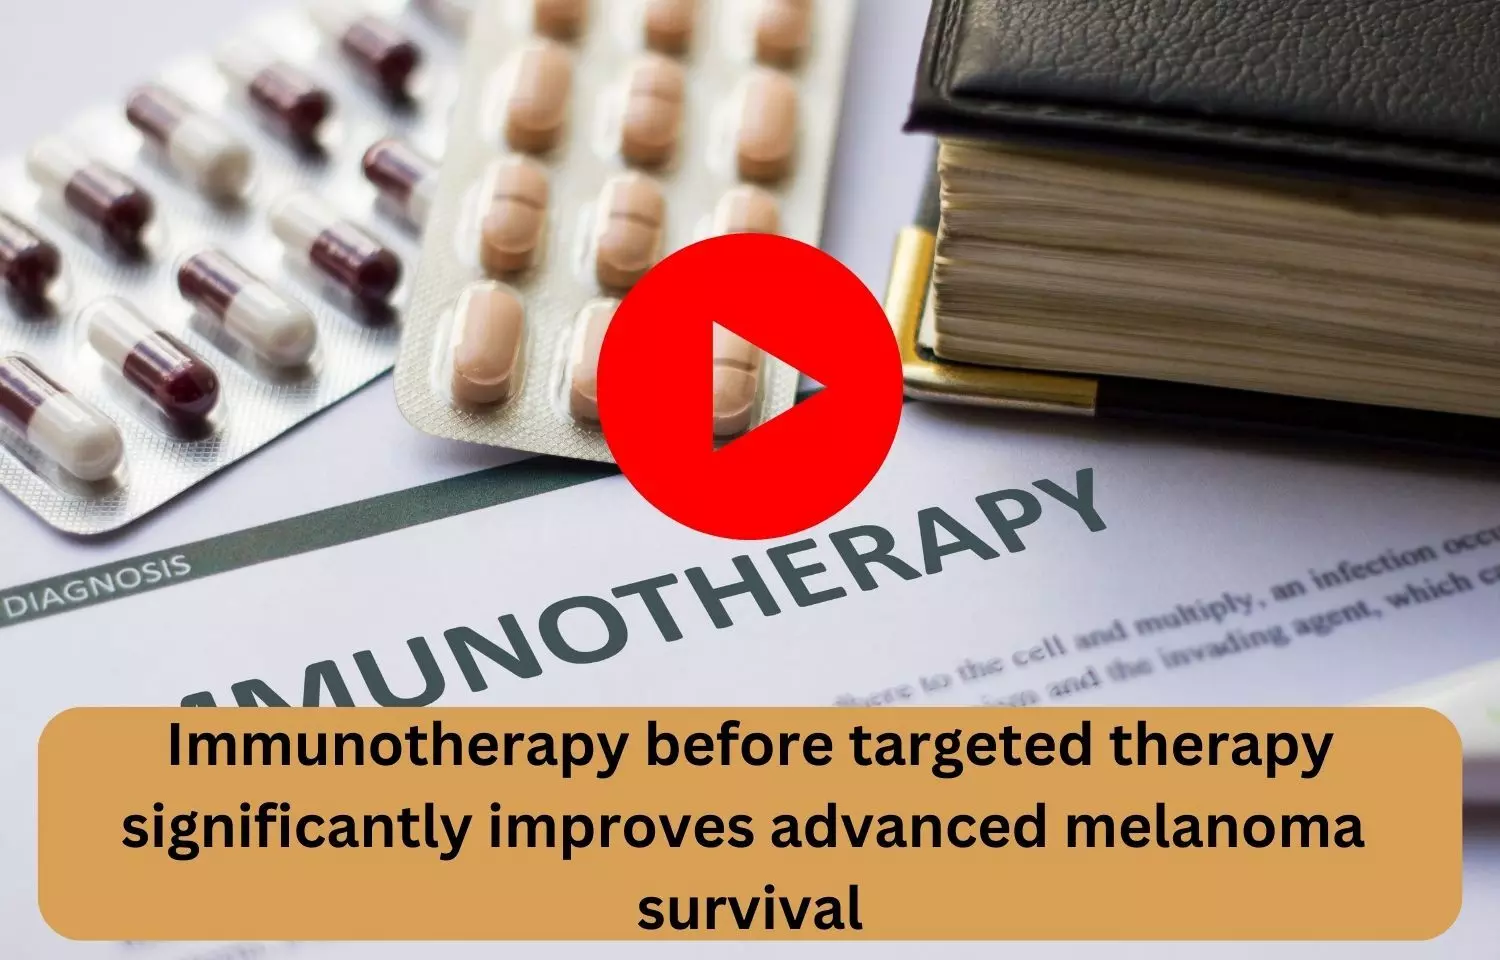 Immunotherapy before targeted therapy significantly improves advanced melanoma survival